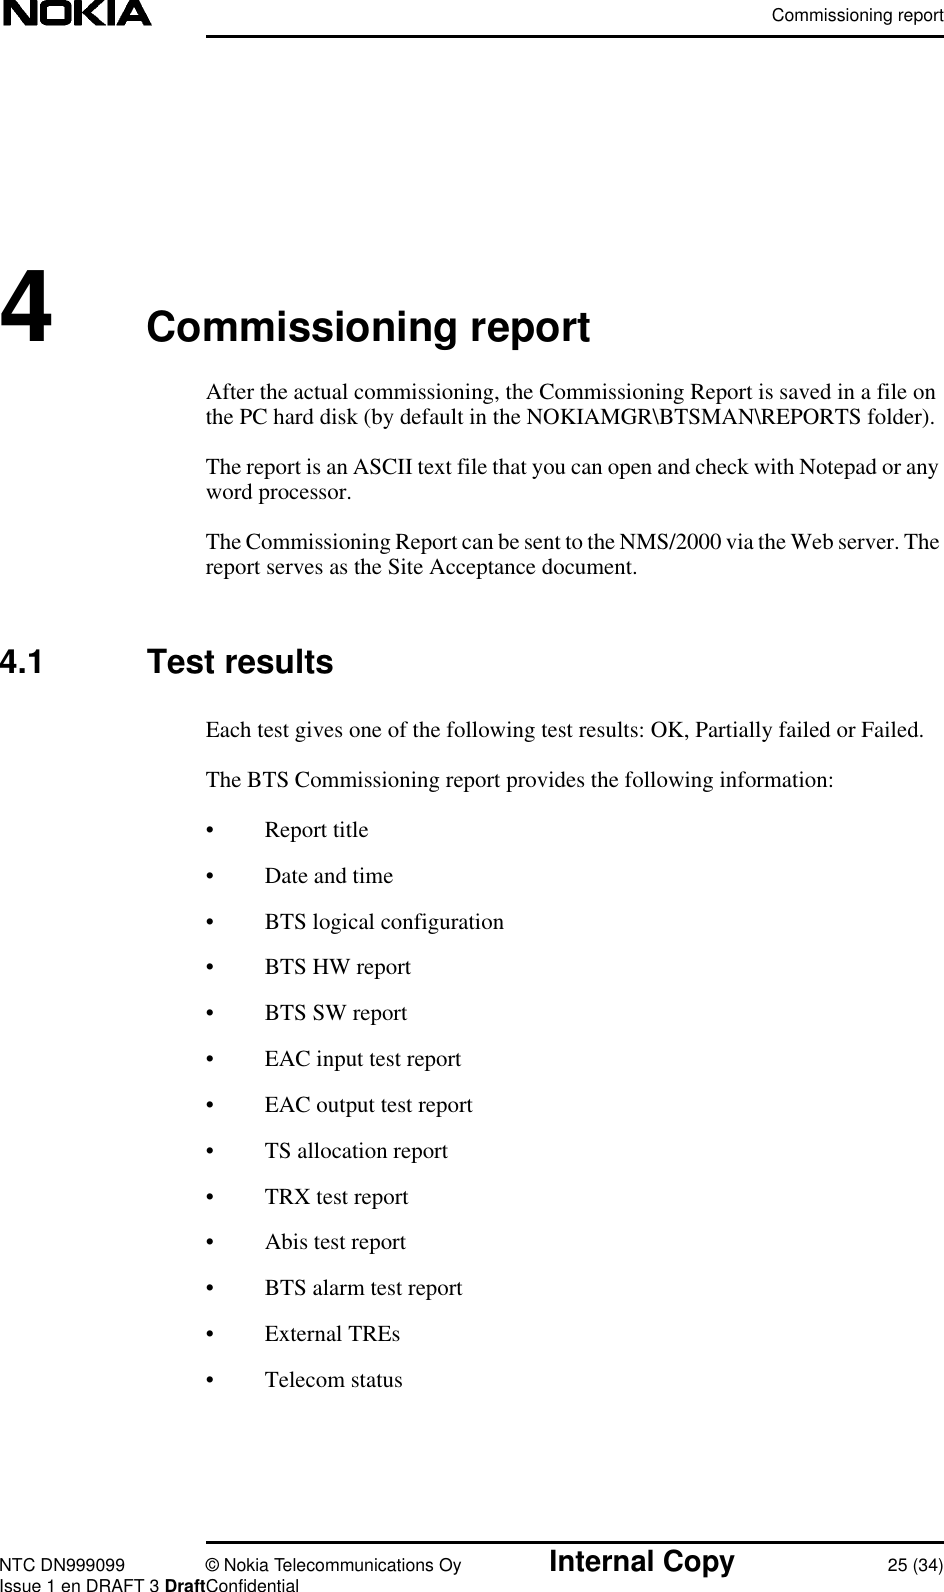 Commissioning reportNTC DN999099 © Nokia Telecommunications Oy Internal Copy 25 (34)Issue 1 en DRAFT 3 DraftConfidential4Commissioning reportAfter the actual commissioning, the Commissioning Report is saved in a file onthe PC hard disk (by default in the NOKIAMGR\BTSMAN\REPORTS folder).The report is an ASCII text file that you can open and check with Notepad or anyword processor.The Commissioning Report can be sent to the NMS/2000 via the Web server. Thereport serves as the Site Acceptance document.4.1 Test resultsEach test gives one of the following test results: OK, Partially failed or Failed.The BTS Commissioning report provides the following information:• Report title• Date and time• BTS logical configuration• BTS HW report• BTS SW report• EAC input test report• EAC output test report• TS allocation report• TRX test report• Abis test report• BTS alarm test report• External TREs• Telecom status